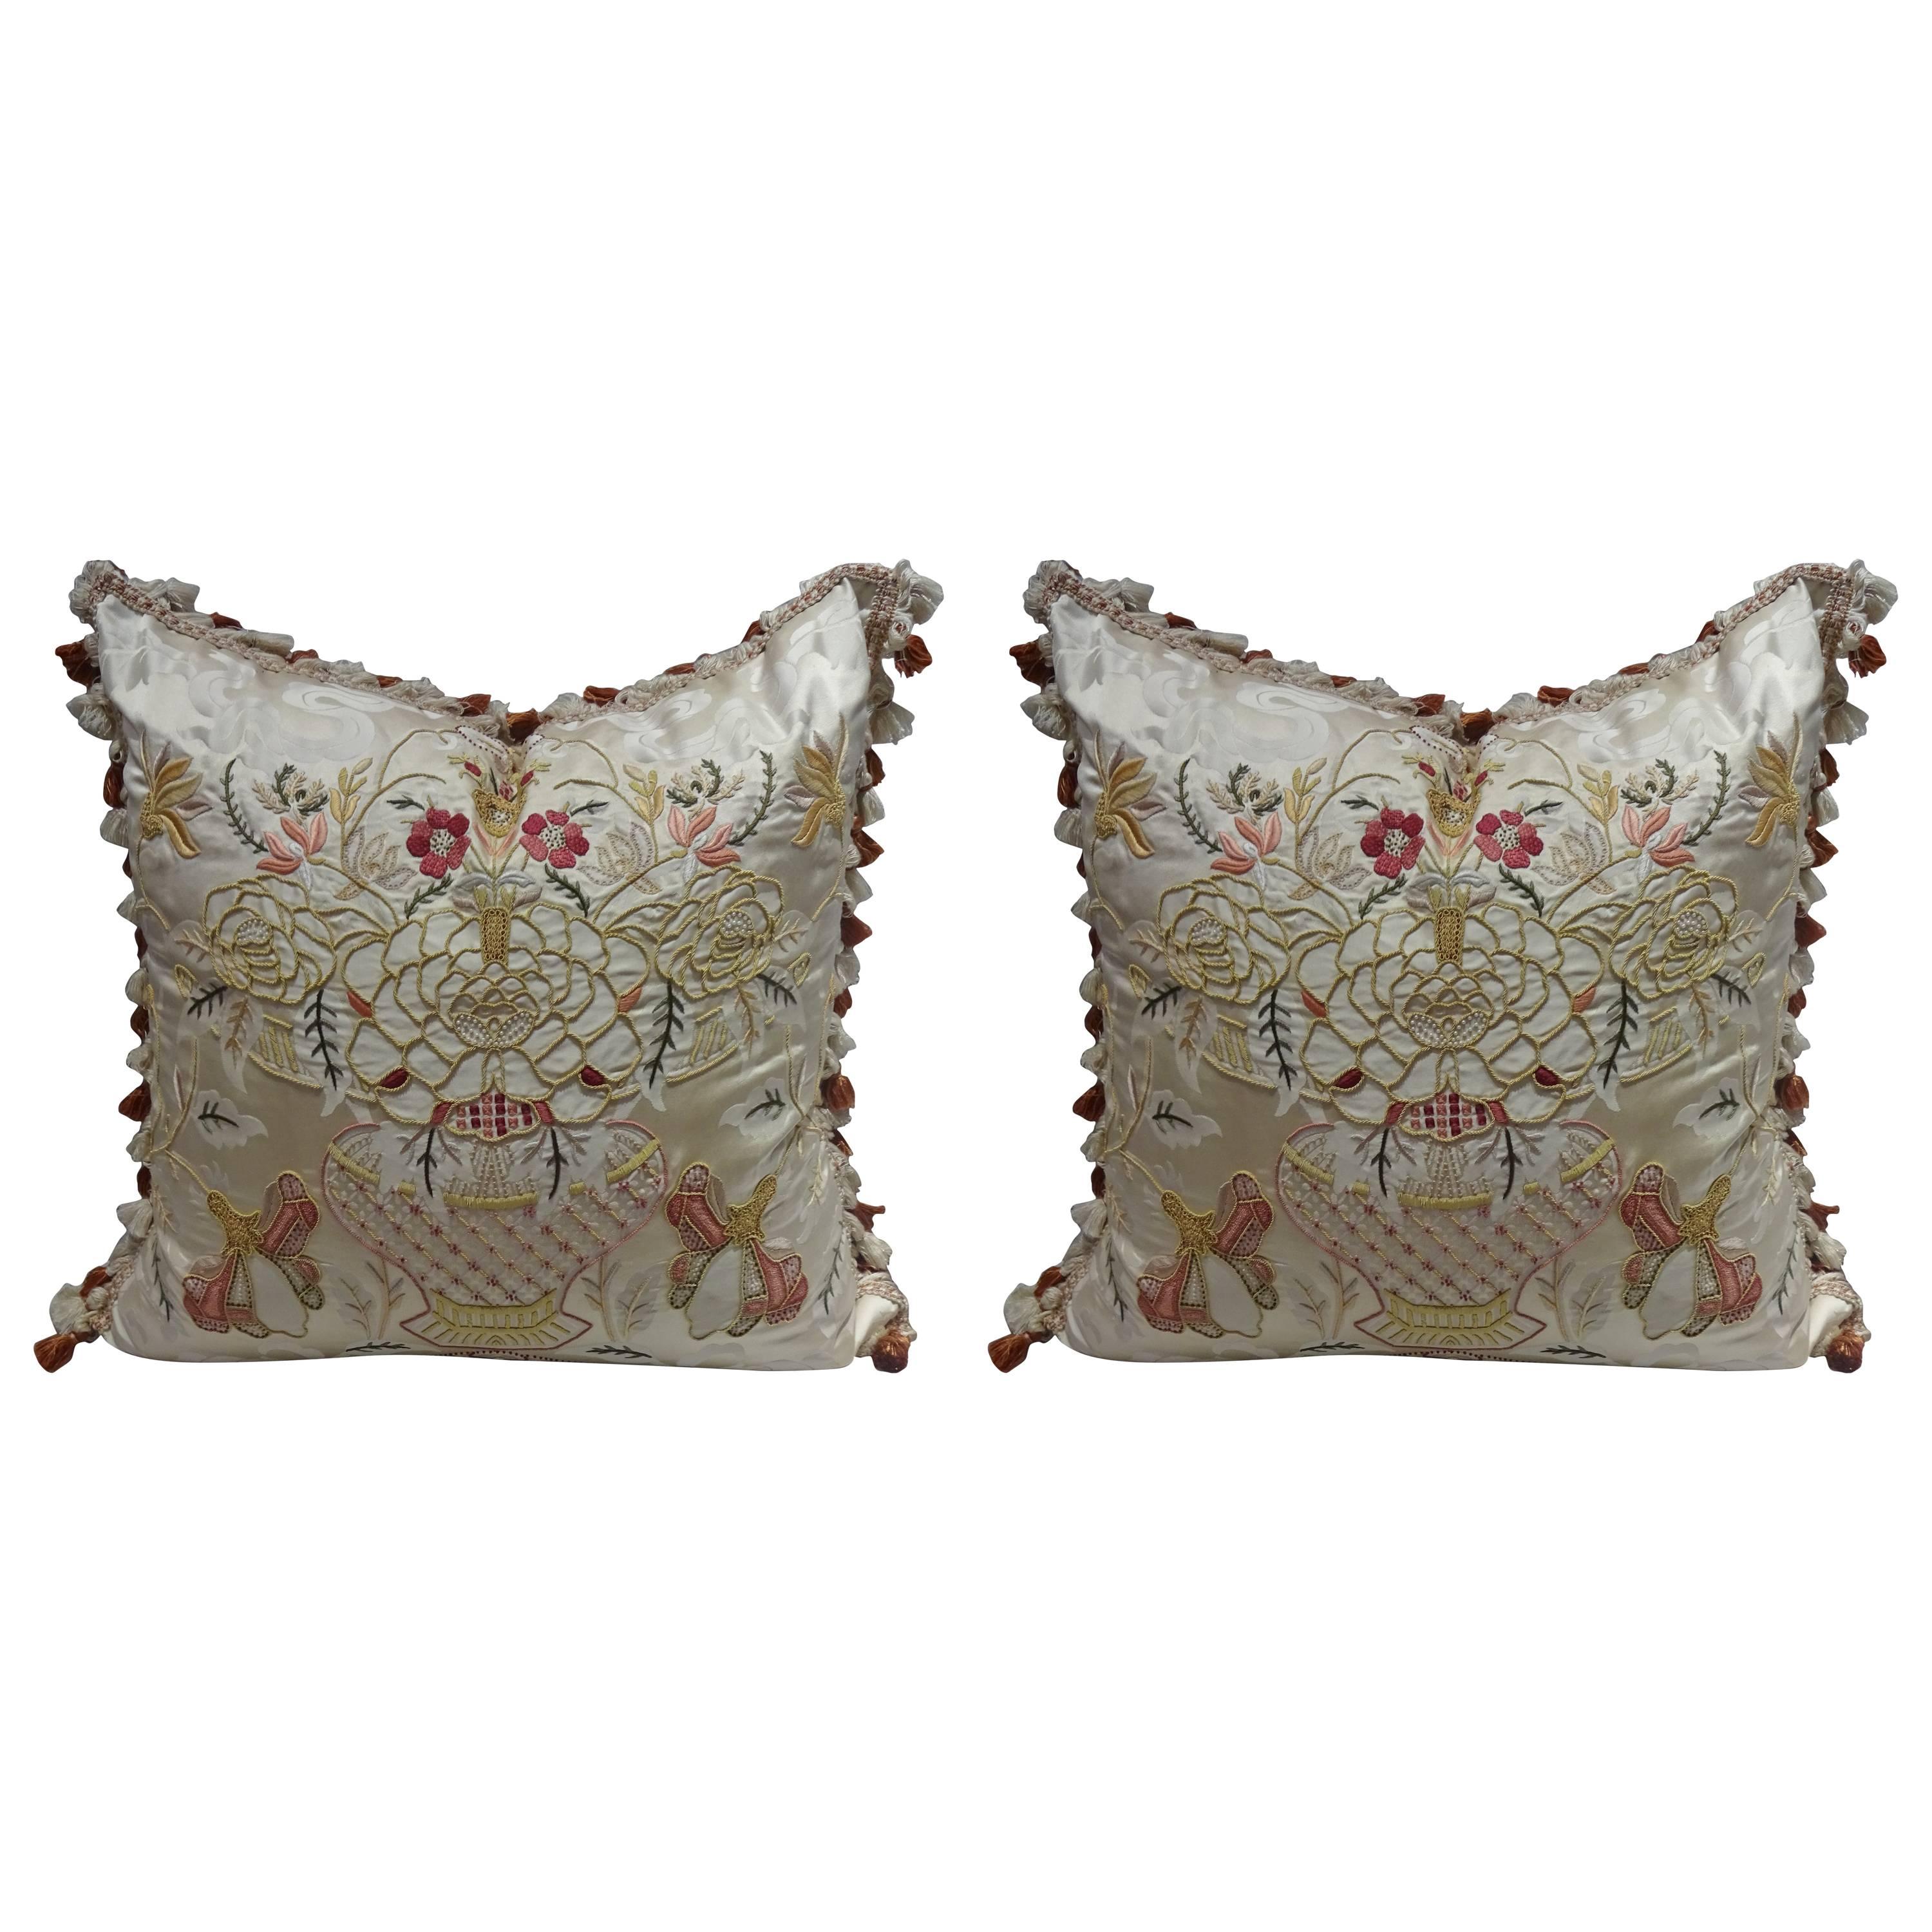 Embroidered Pillows in Cream Scalamandre Fabric For Sale